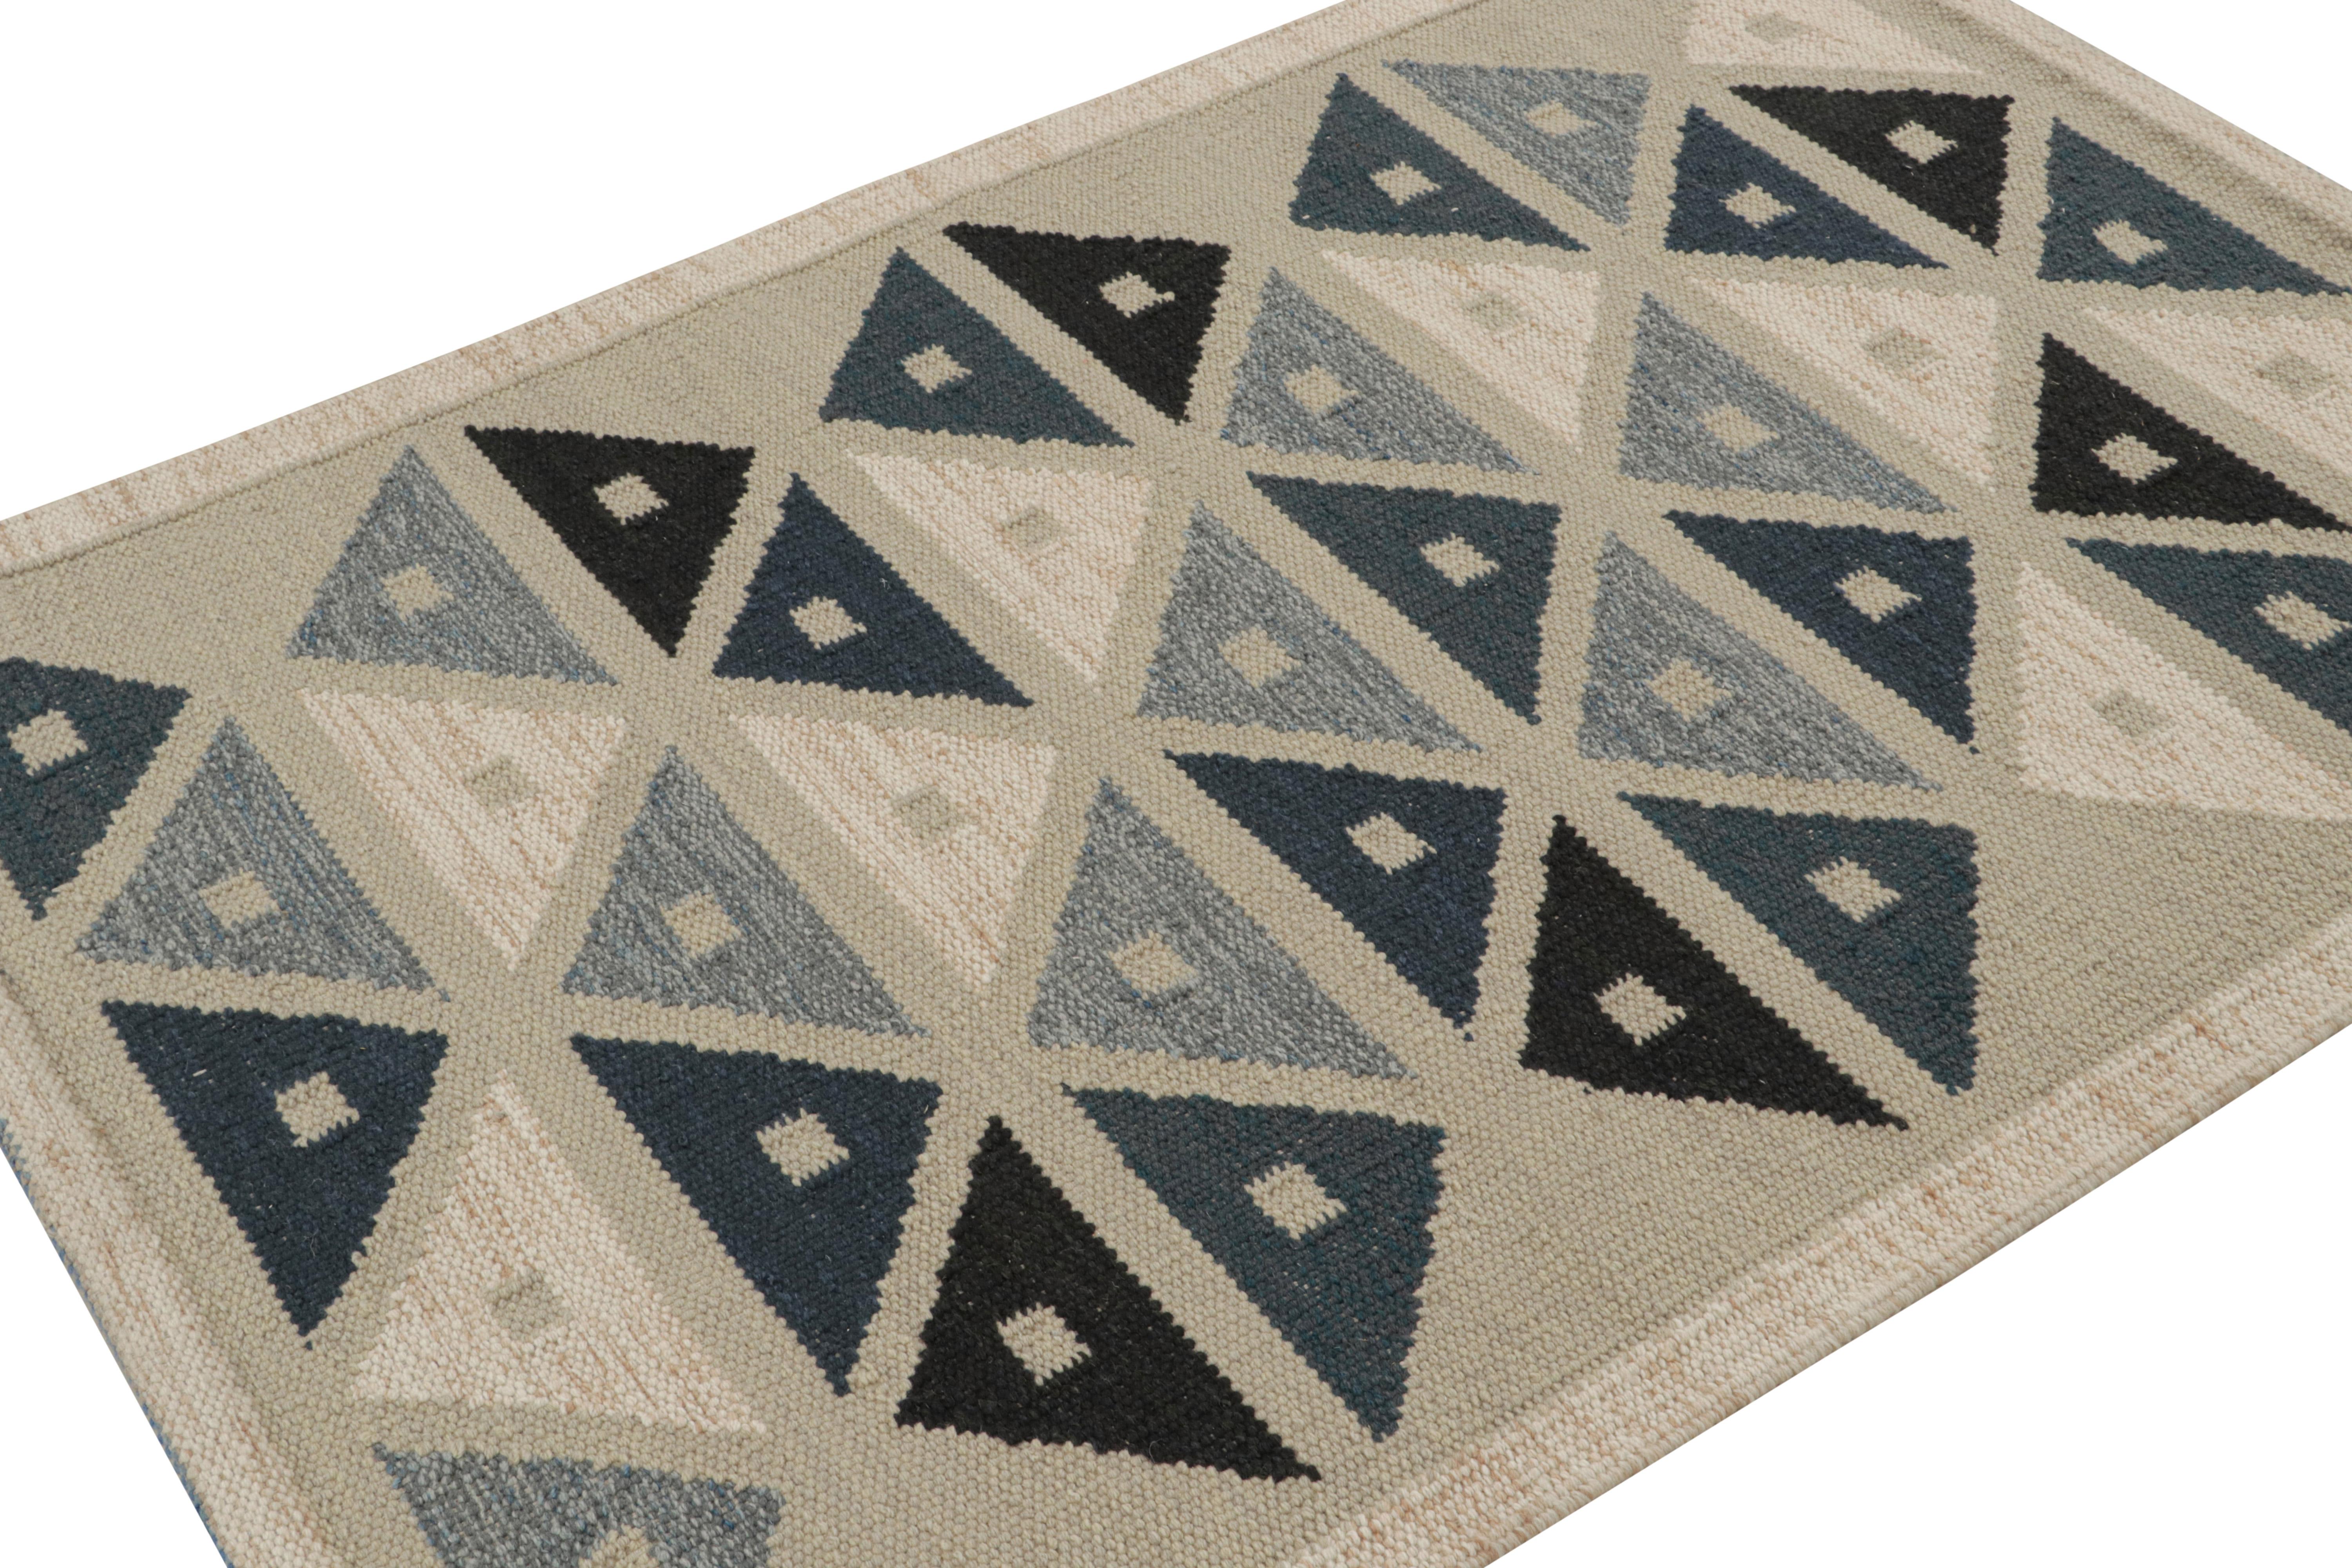 This 4x6 Kilim rug is from the flatweave line in the Scandinavian rug collection by Rug & Kilim. Handwoven in wool, cotton and natural yarns, its design is a modern take on Rollakan and Rya rugs in the Swedish Deco style. 

On the Design: 

These